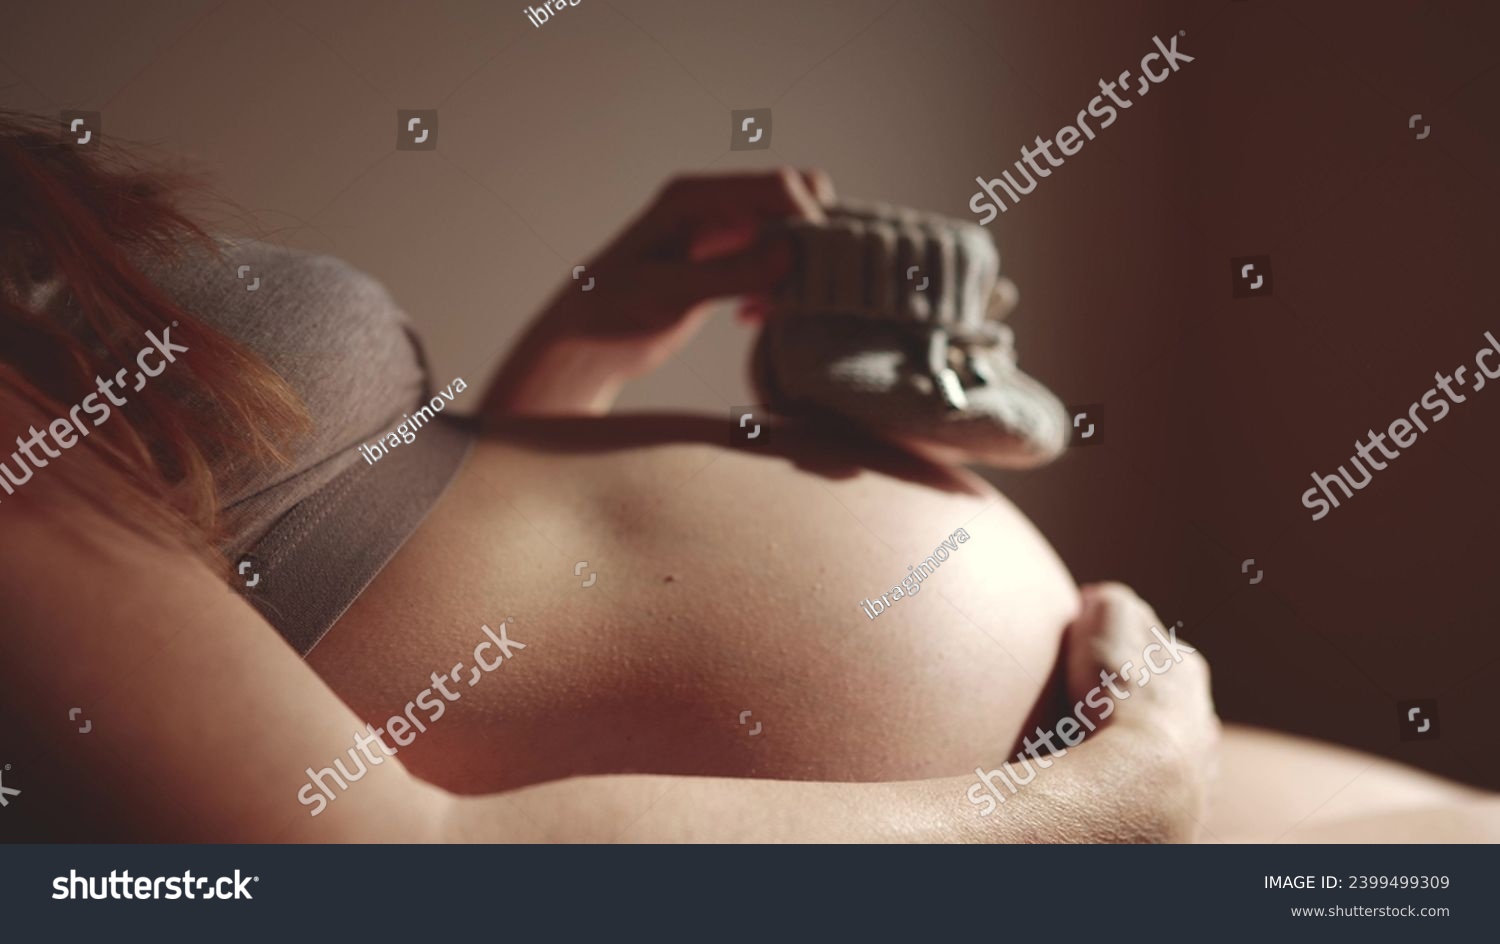 happy pregnant woman. booties baby shoes on the belly of lifestyle a pregnant woman. pregnancy health procreation concept. close-up belly of a pregnant woman. woman waiting for a newborn baby #2399499309